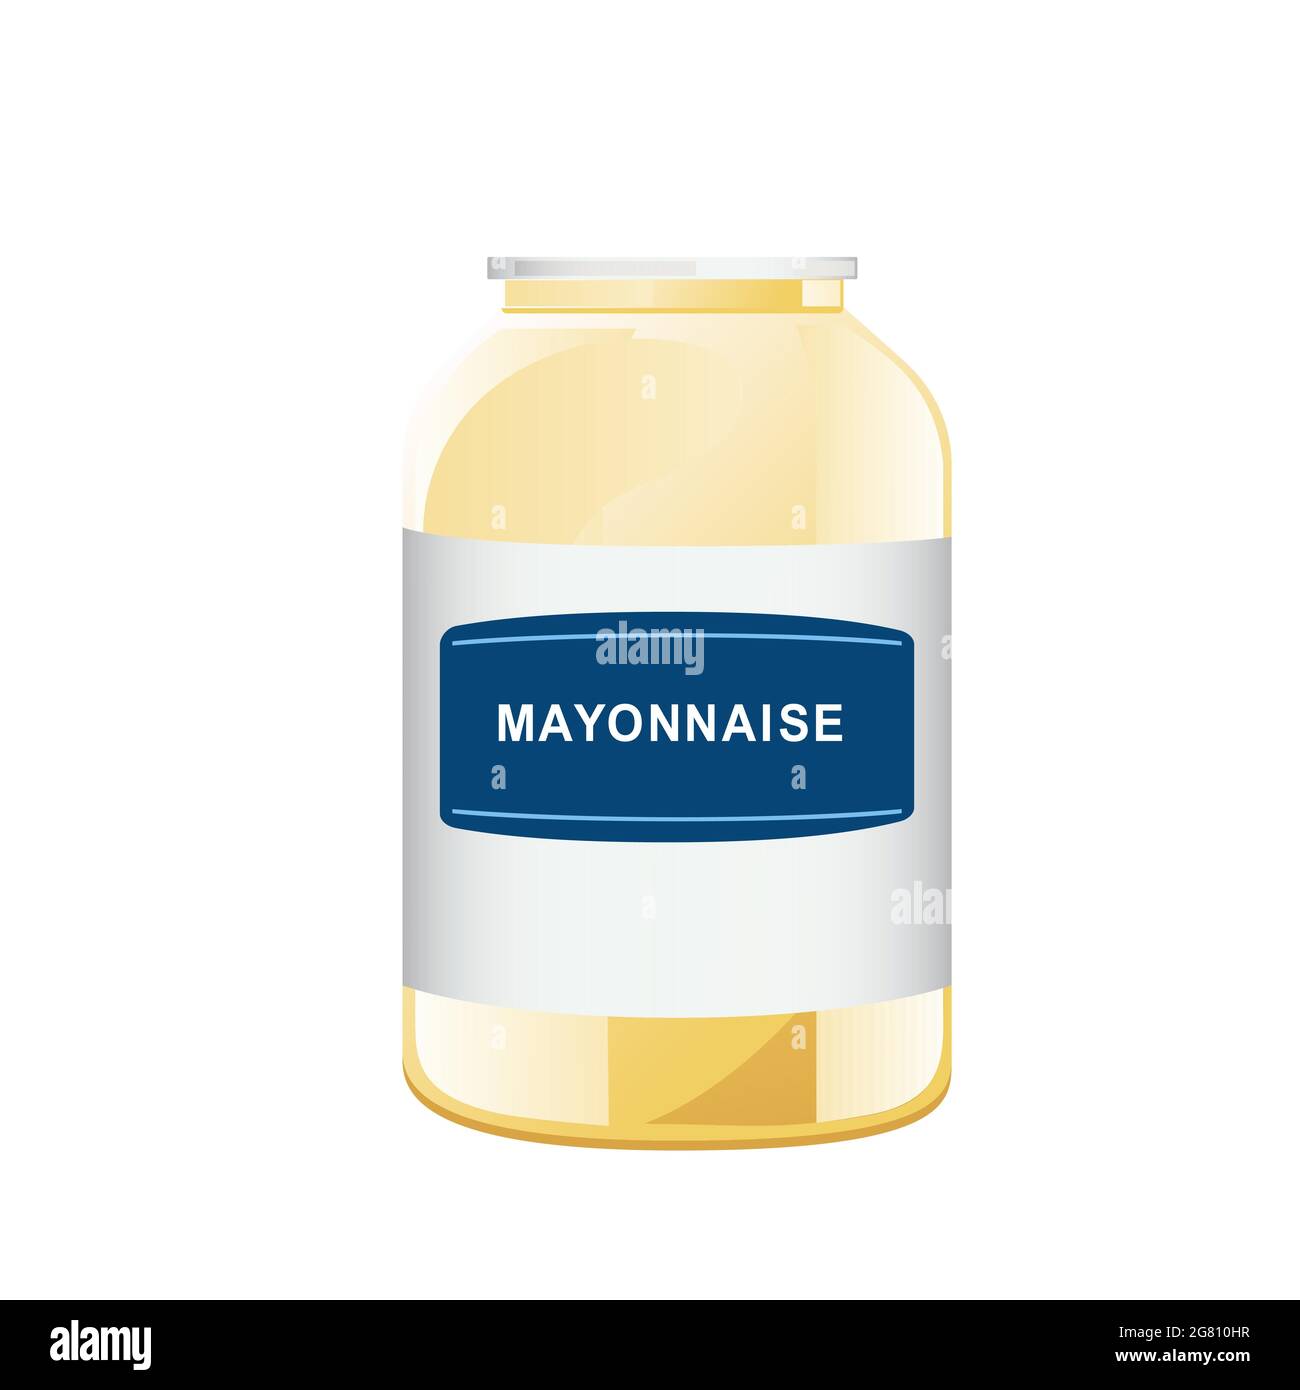 Open Mayonnaise Sauce in Dip Container Isolated on White. 3D Rendering  Stock Illustration - Illustration of away, white: 229134204